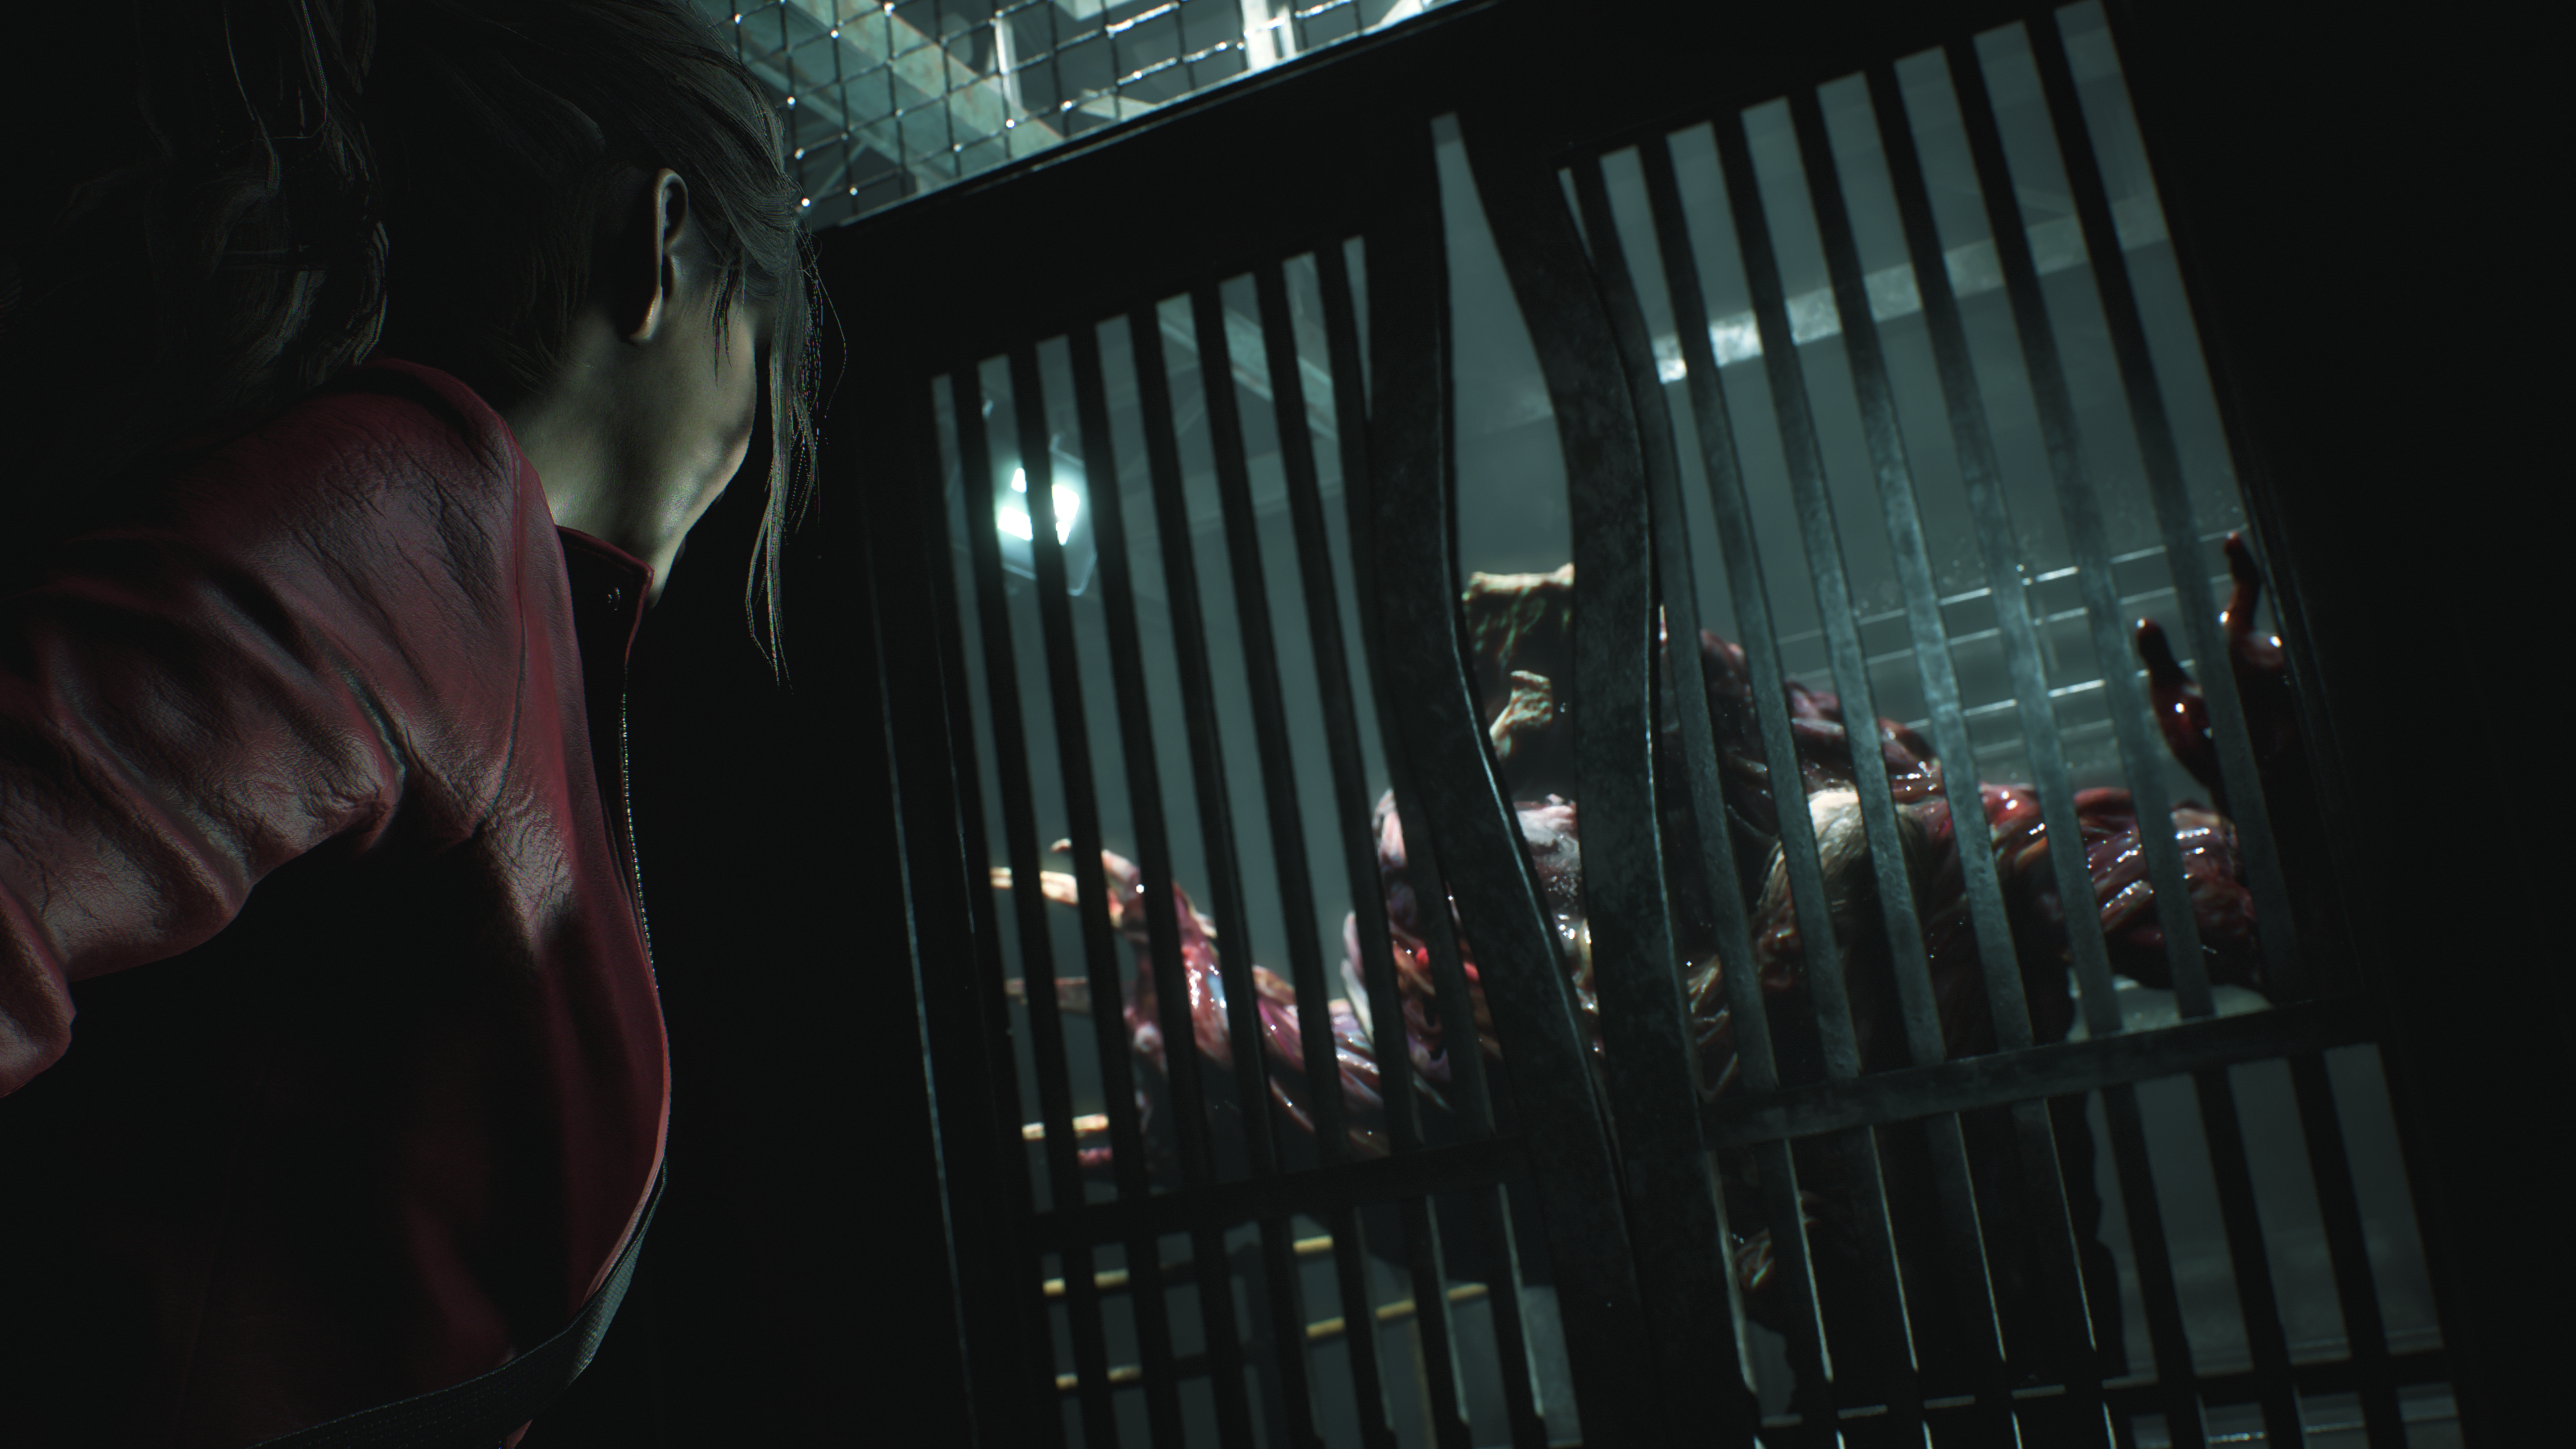 VGC's 2019 Game of the Year is Resident Evil 2